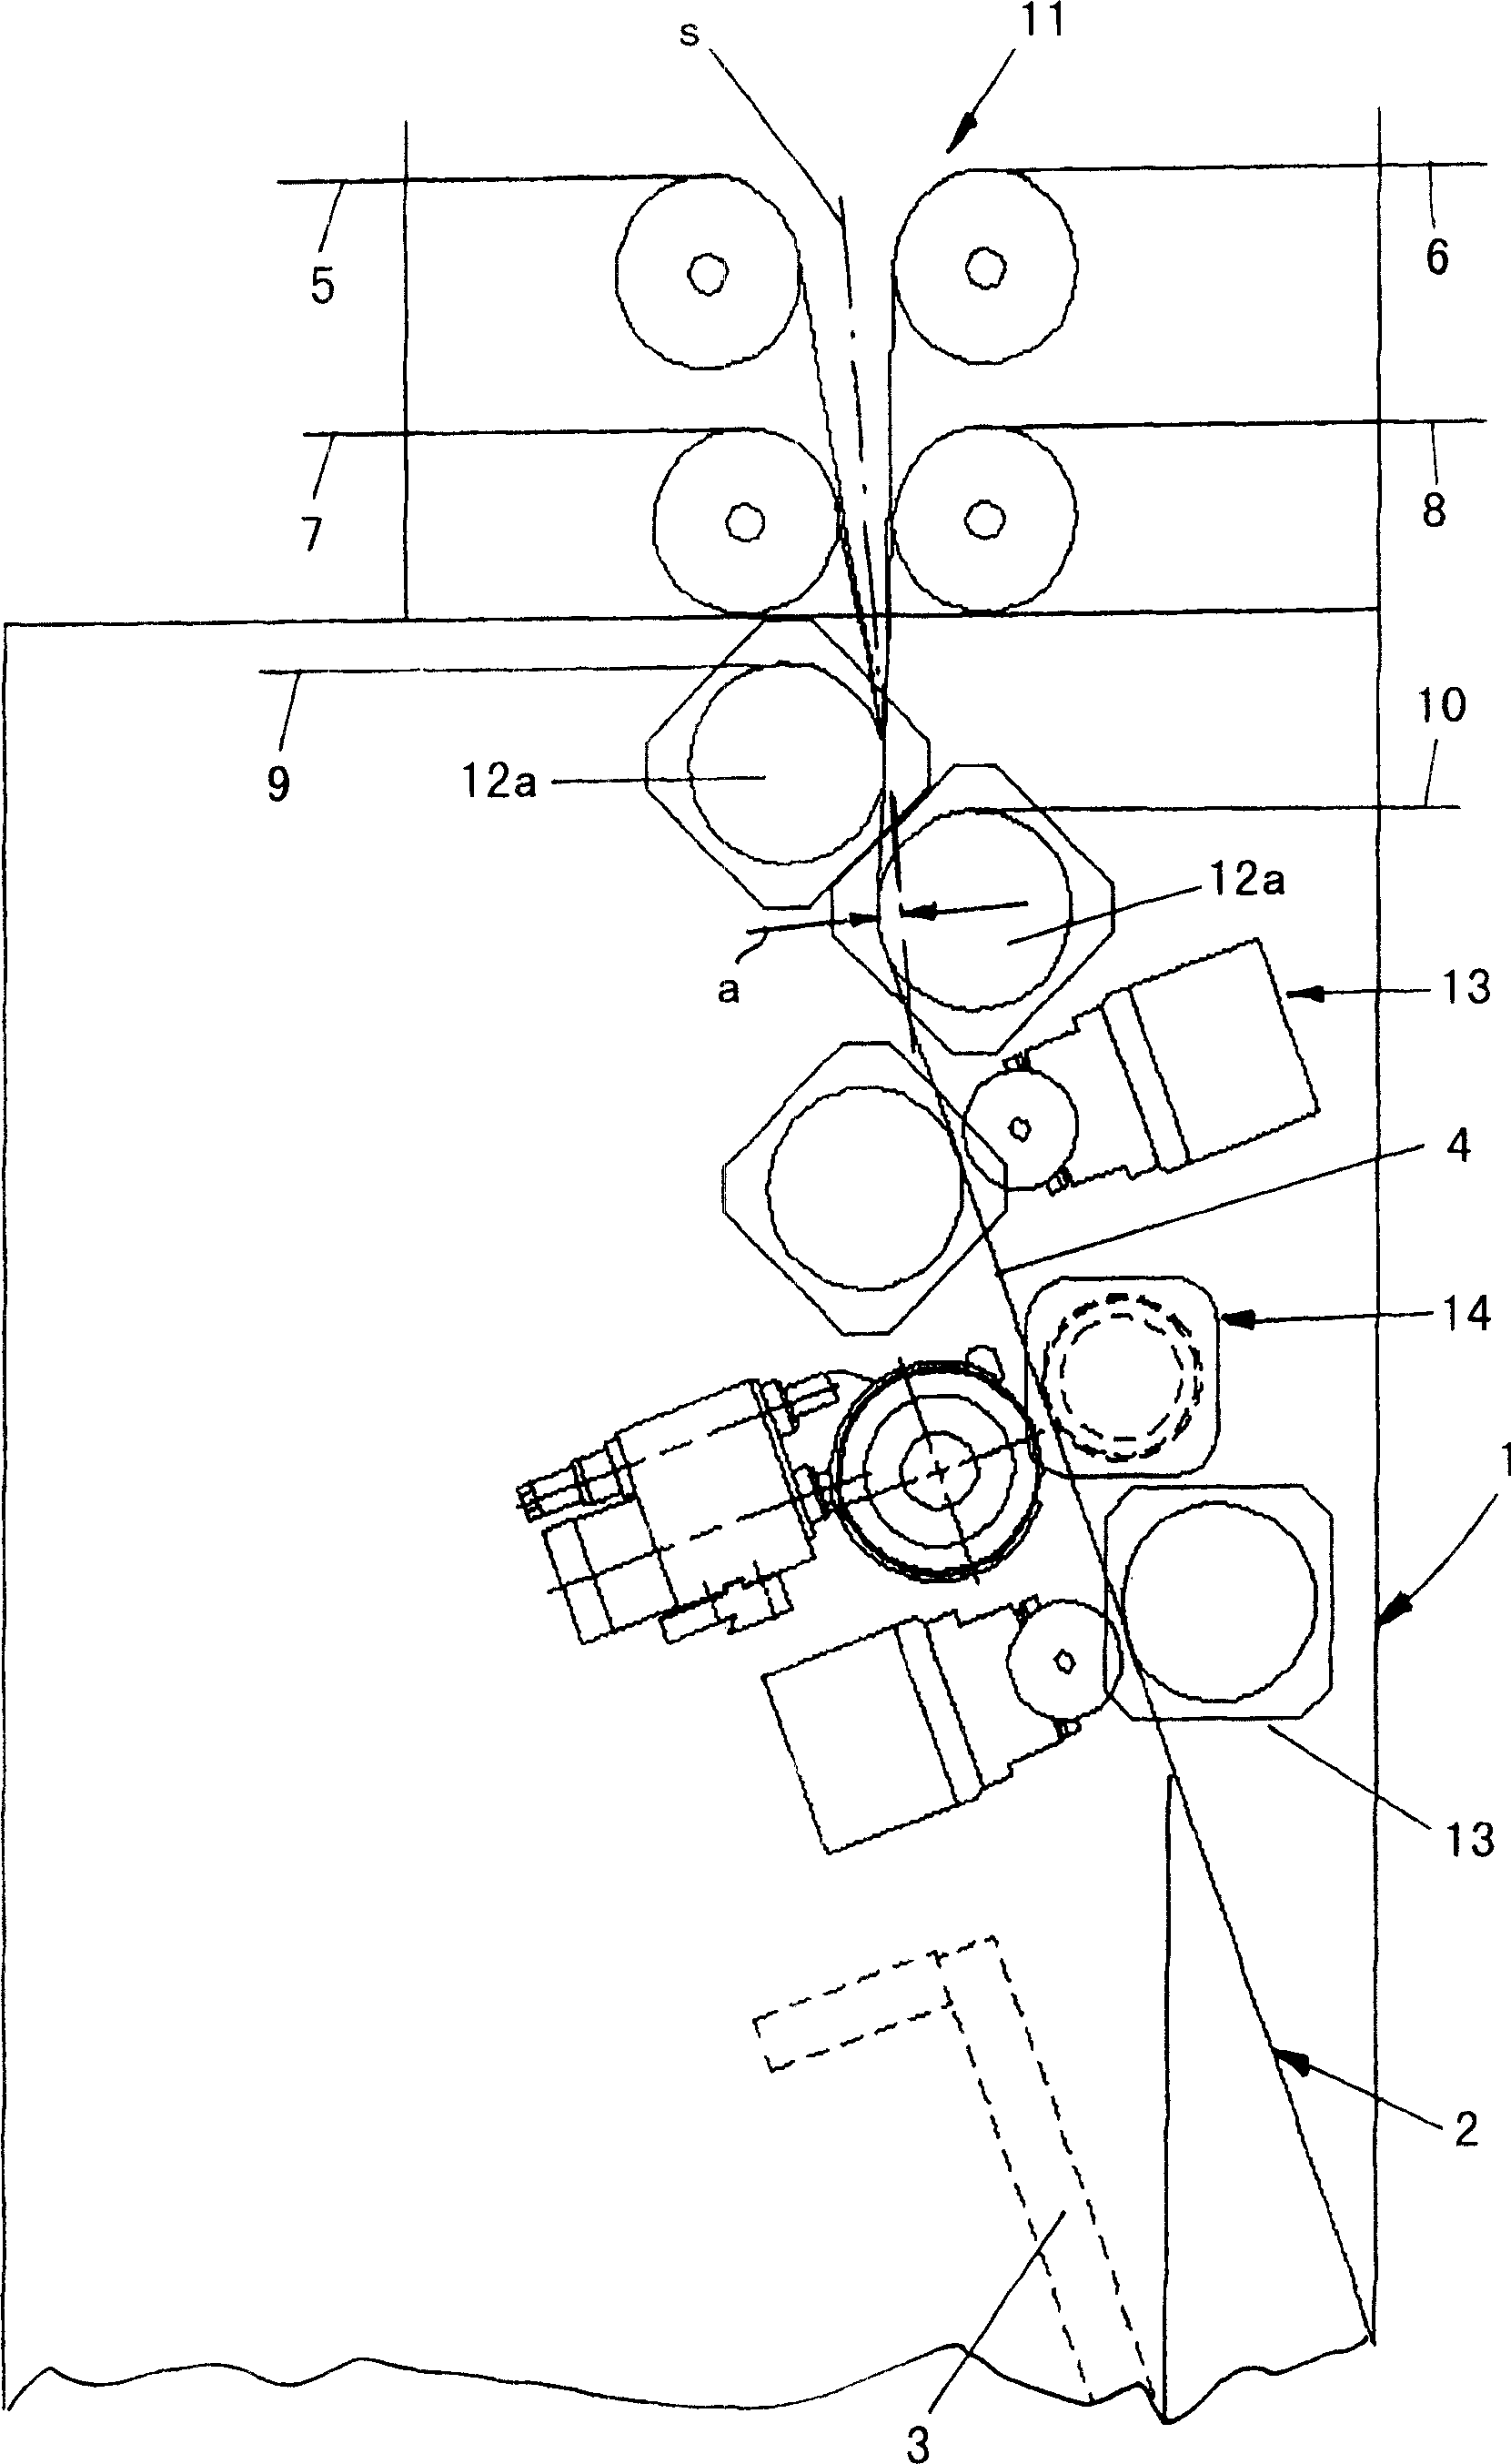 Device for combining several printed webs